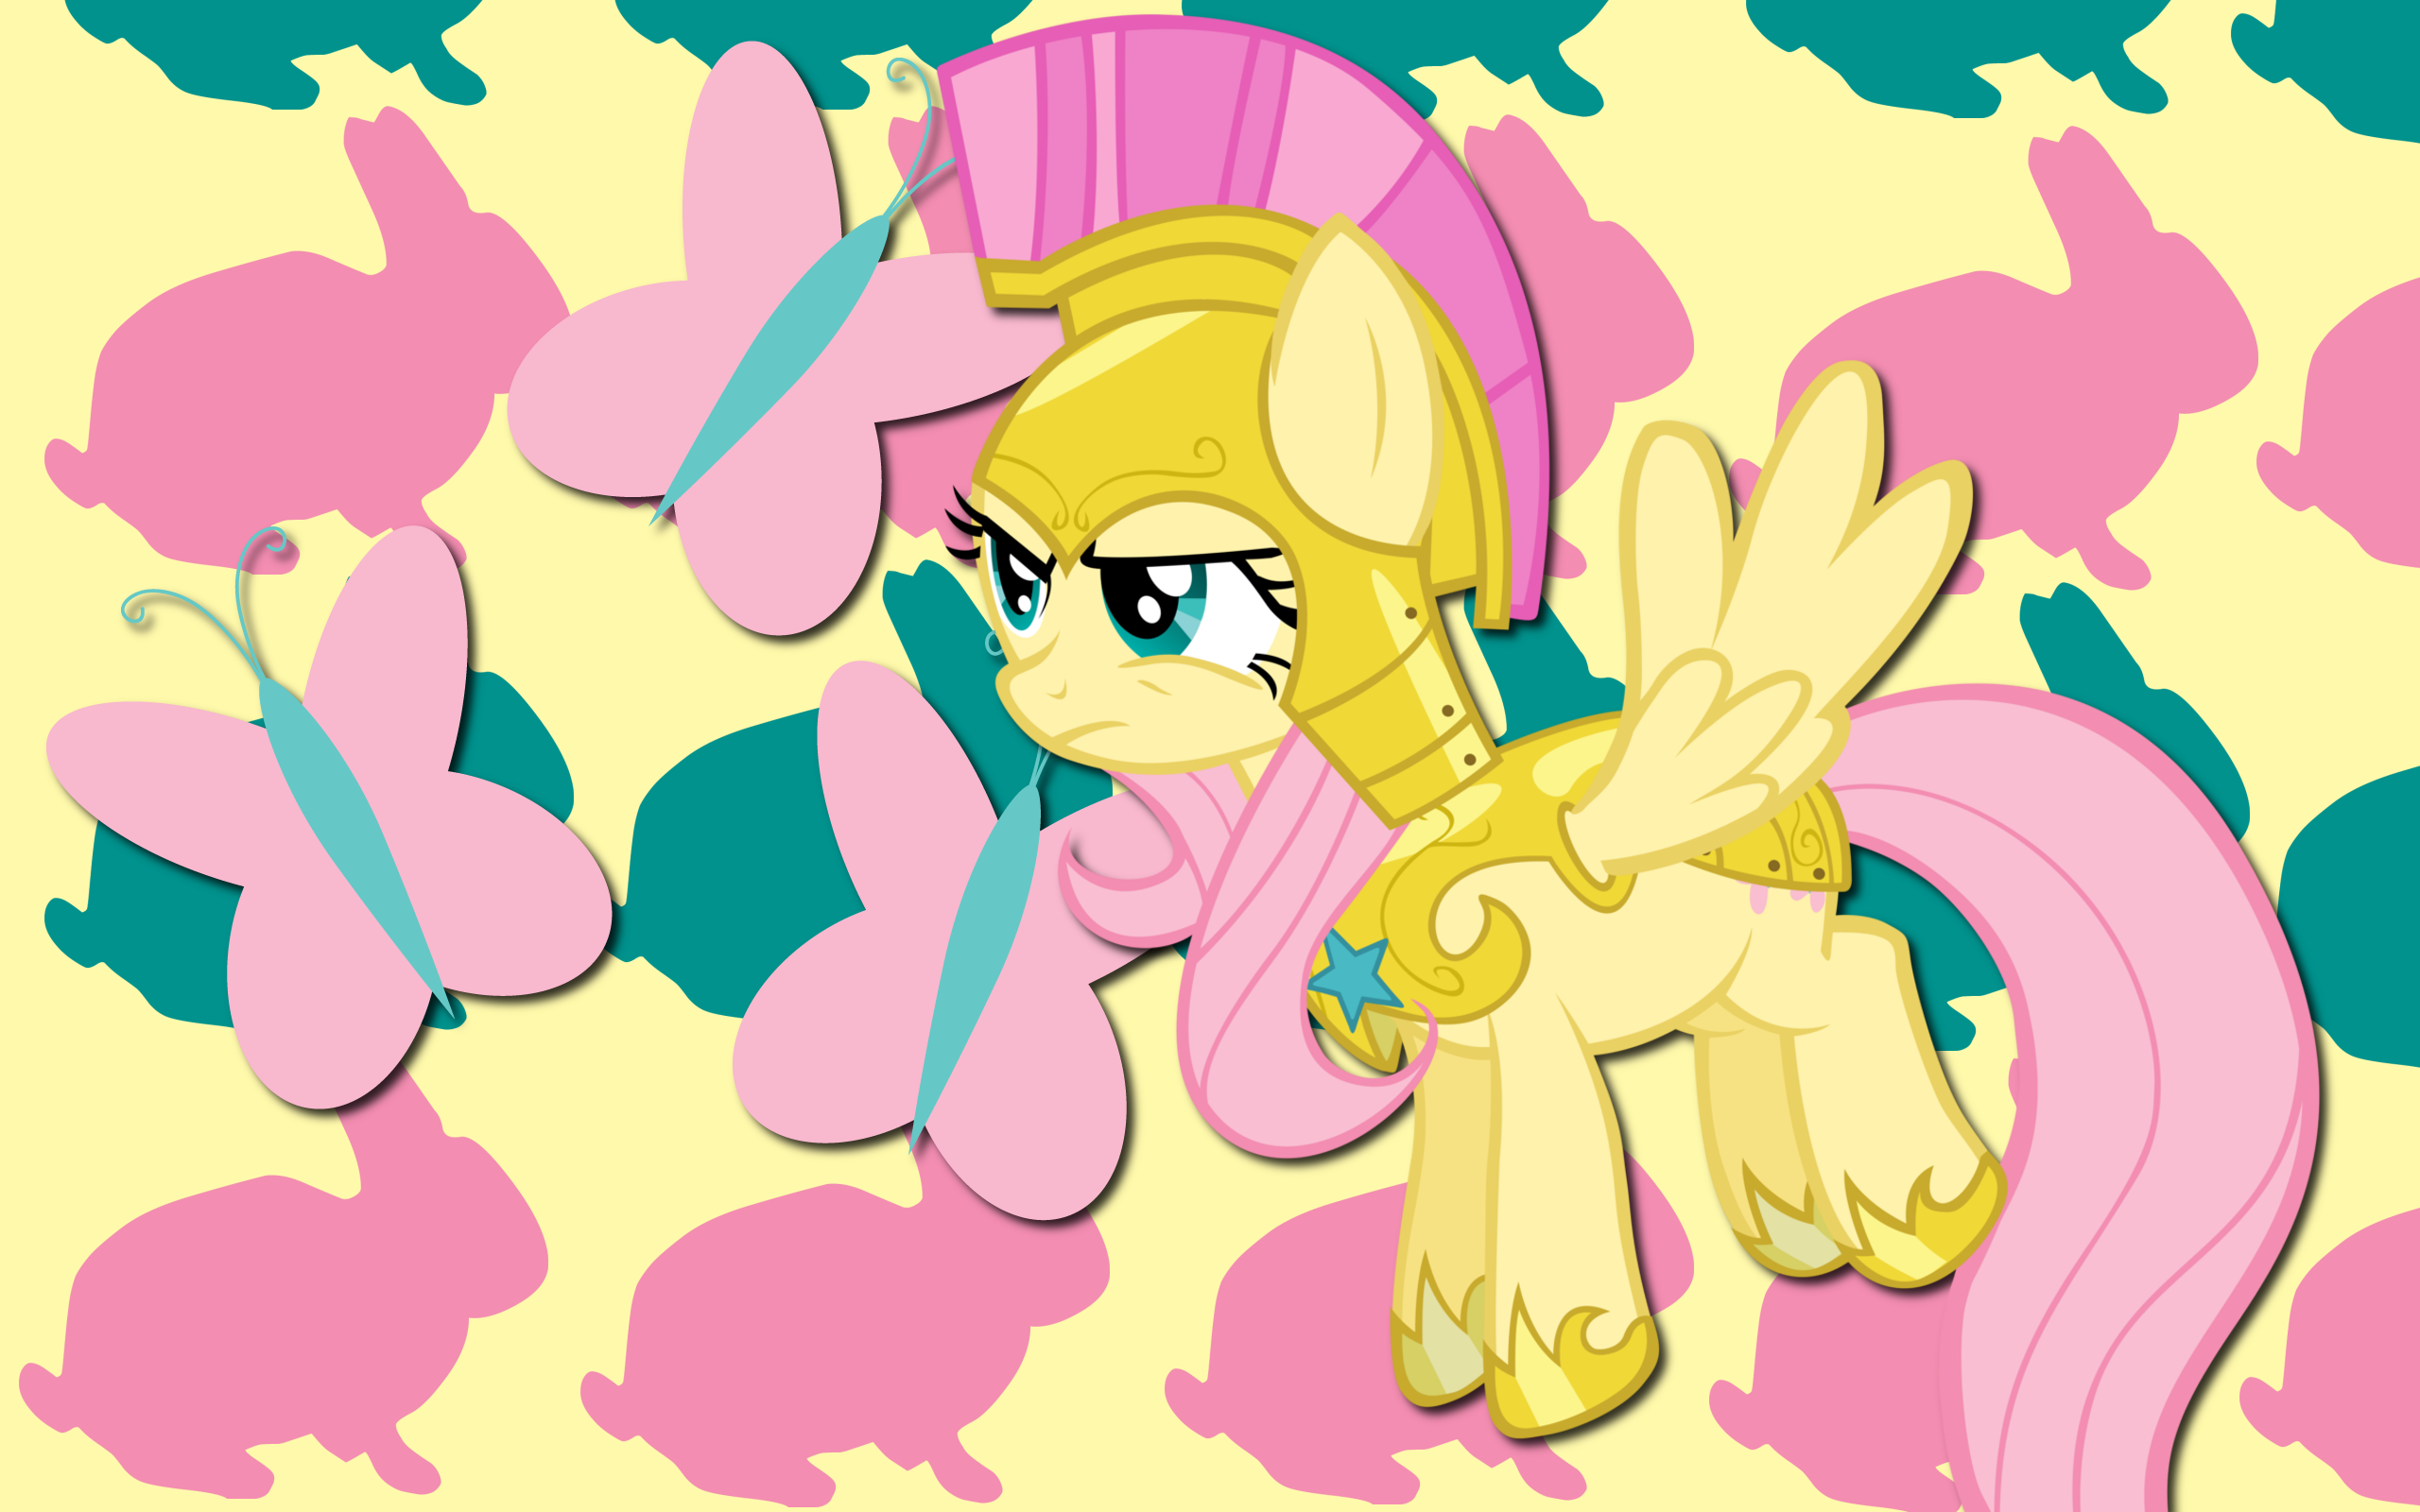 Guard Fluttershy WP by AliceHumanSacrifice0, ooklah and Spaceponies